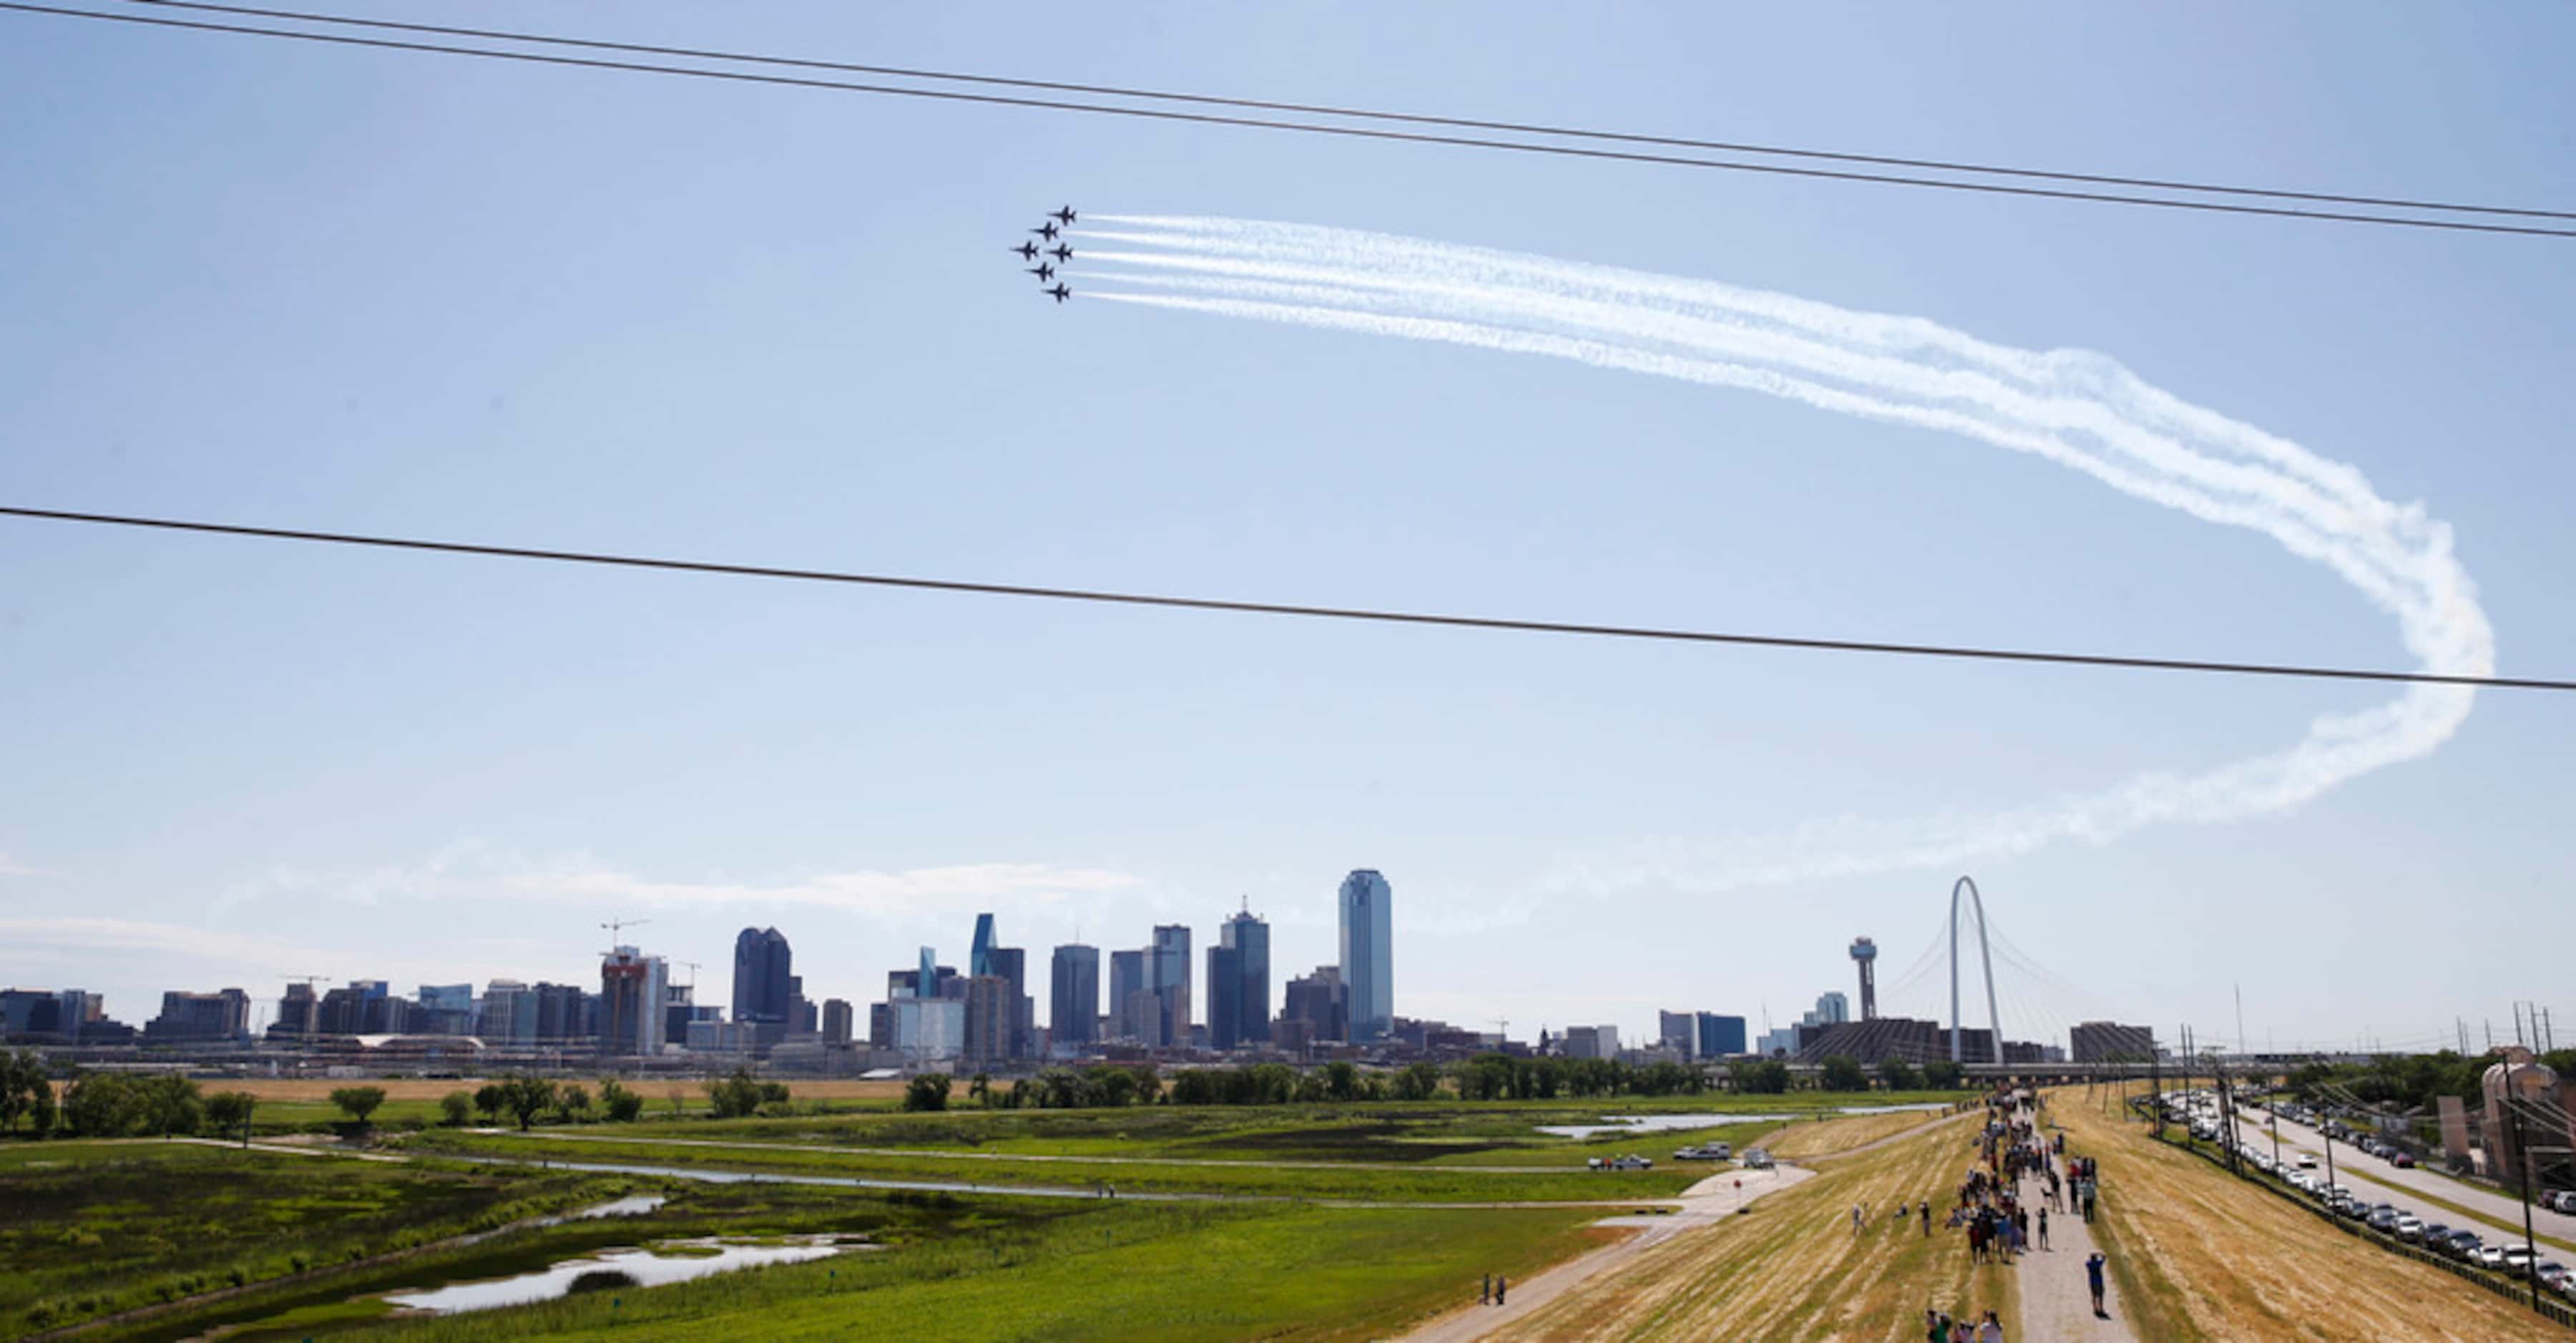 The U.S. Navy Blue Angels fly over downtown Dallas during the "America Strong" flyover event...